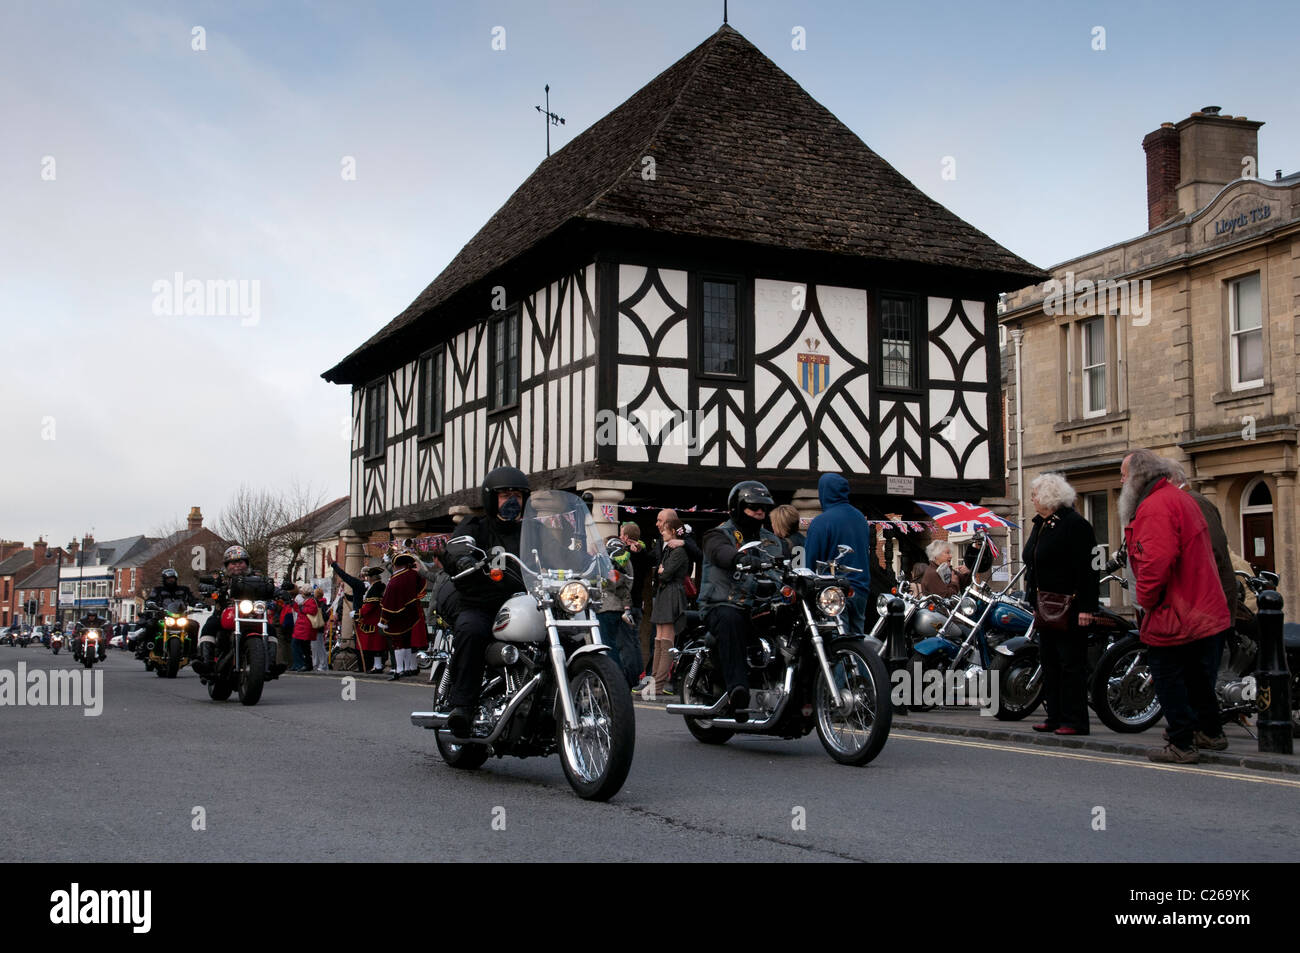 Motorcyclists taking part in the Ride of Respect Charity Event ride their bikes in Wooton Bassett High Street Stock Photo